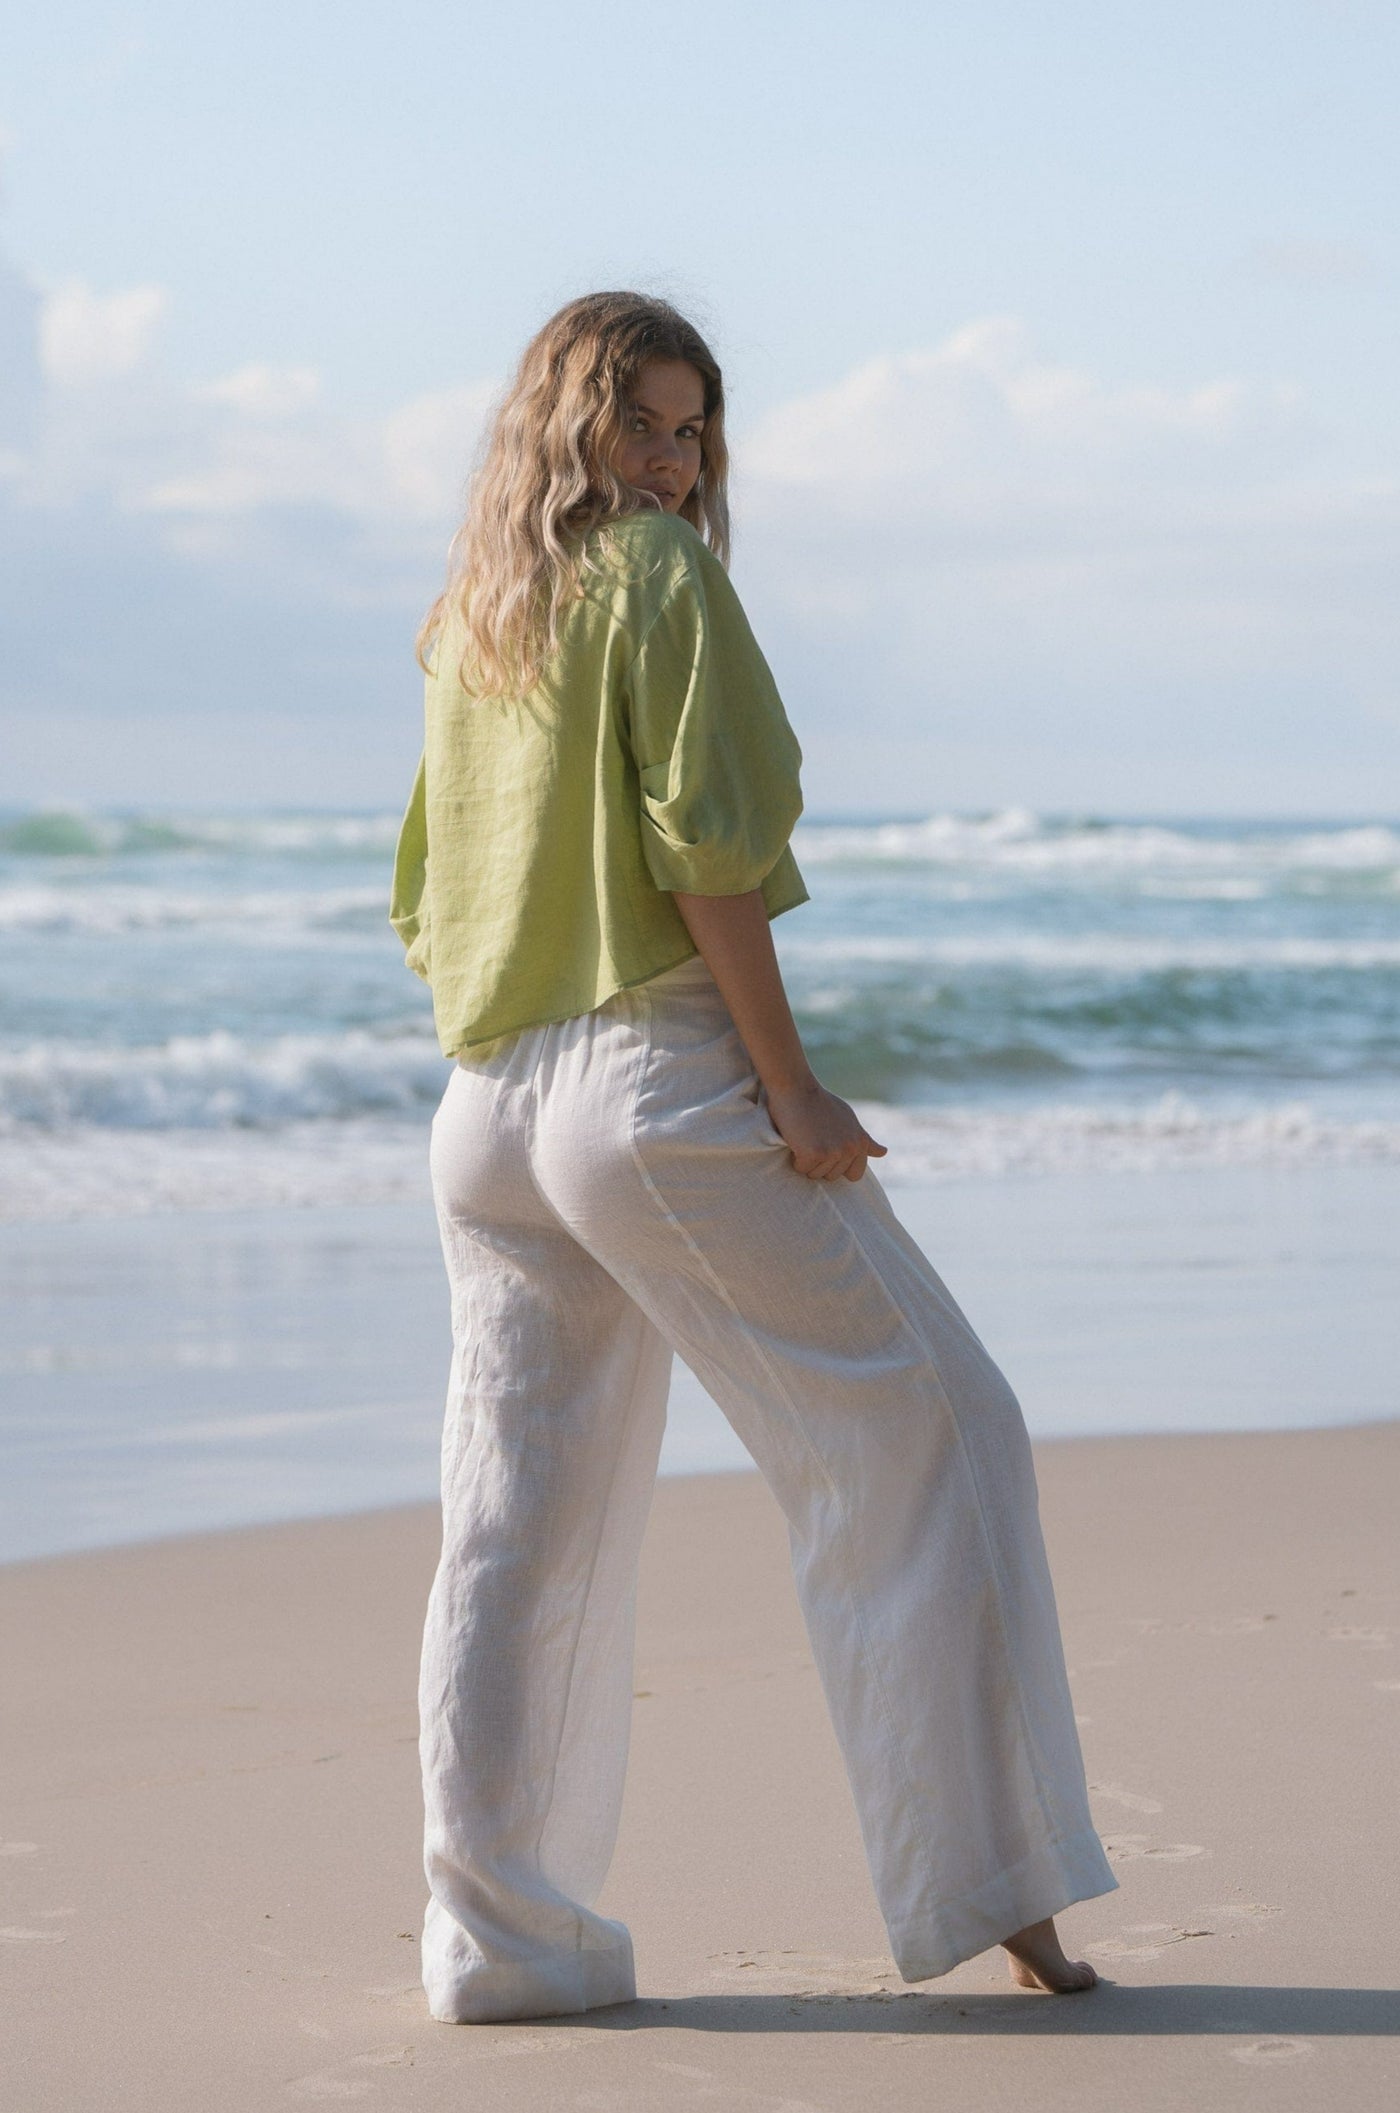 Lilly Pilly Collection 100% organic linen Leia Top in Lemongrass